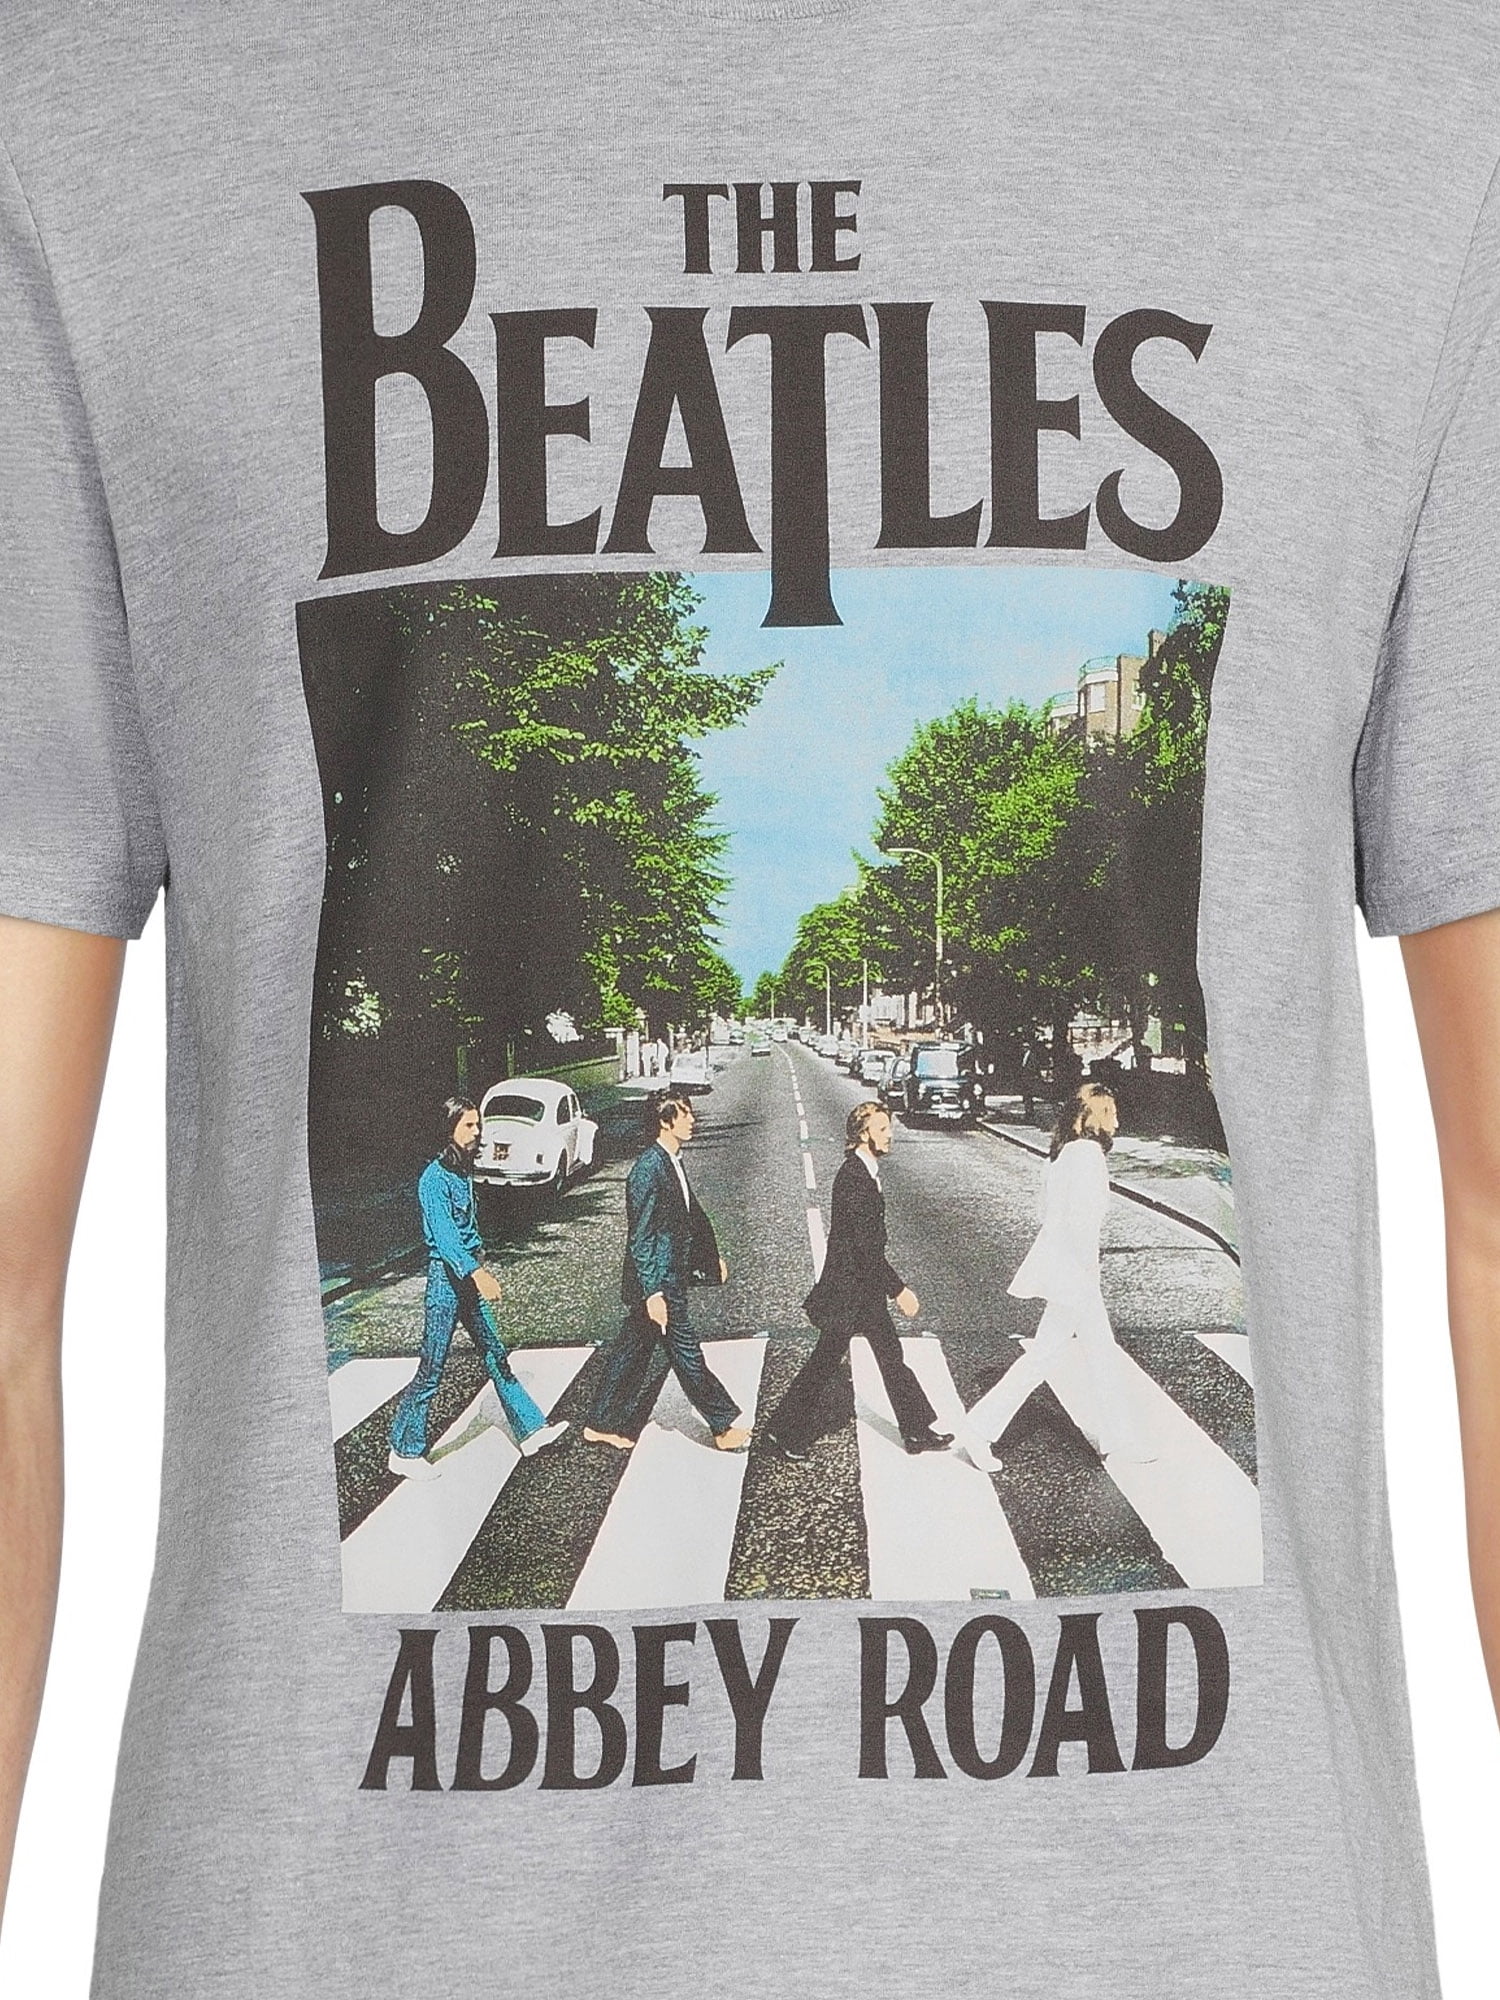 The Beatles Men's Abbey Road Graphic T-Shirt with Short Sleeves